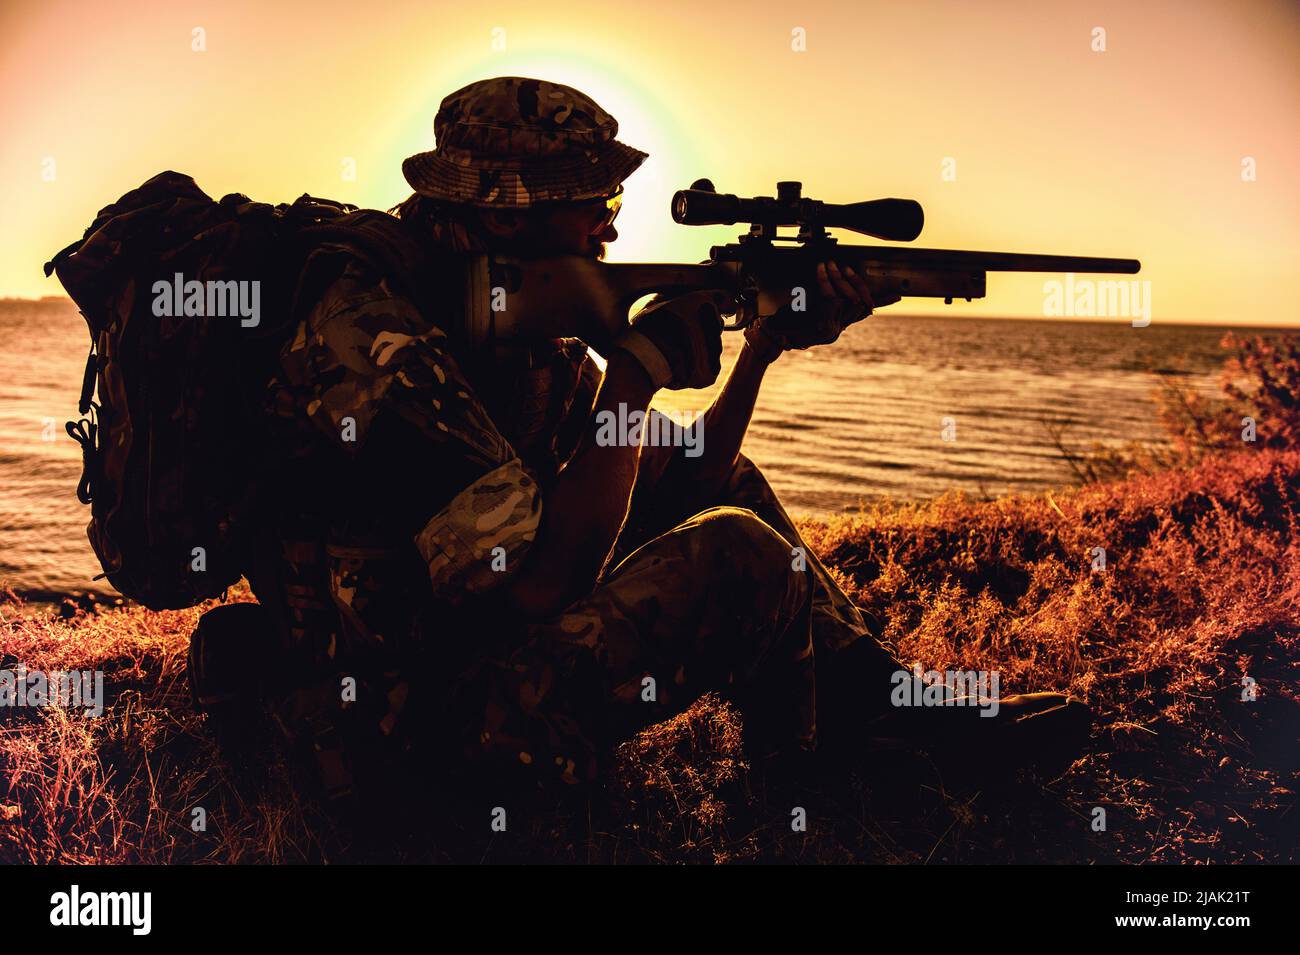 Silhouette of a sniper aiming rifle while sitting on the ocean shore during sunset. Stock Photo